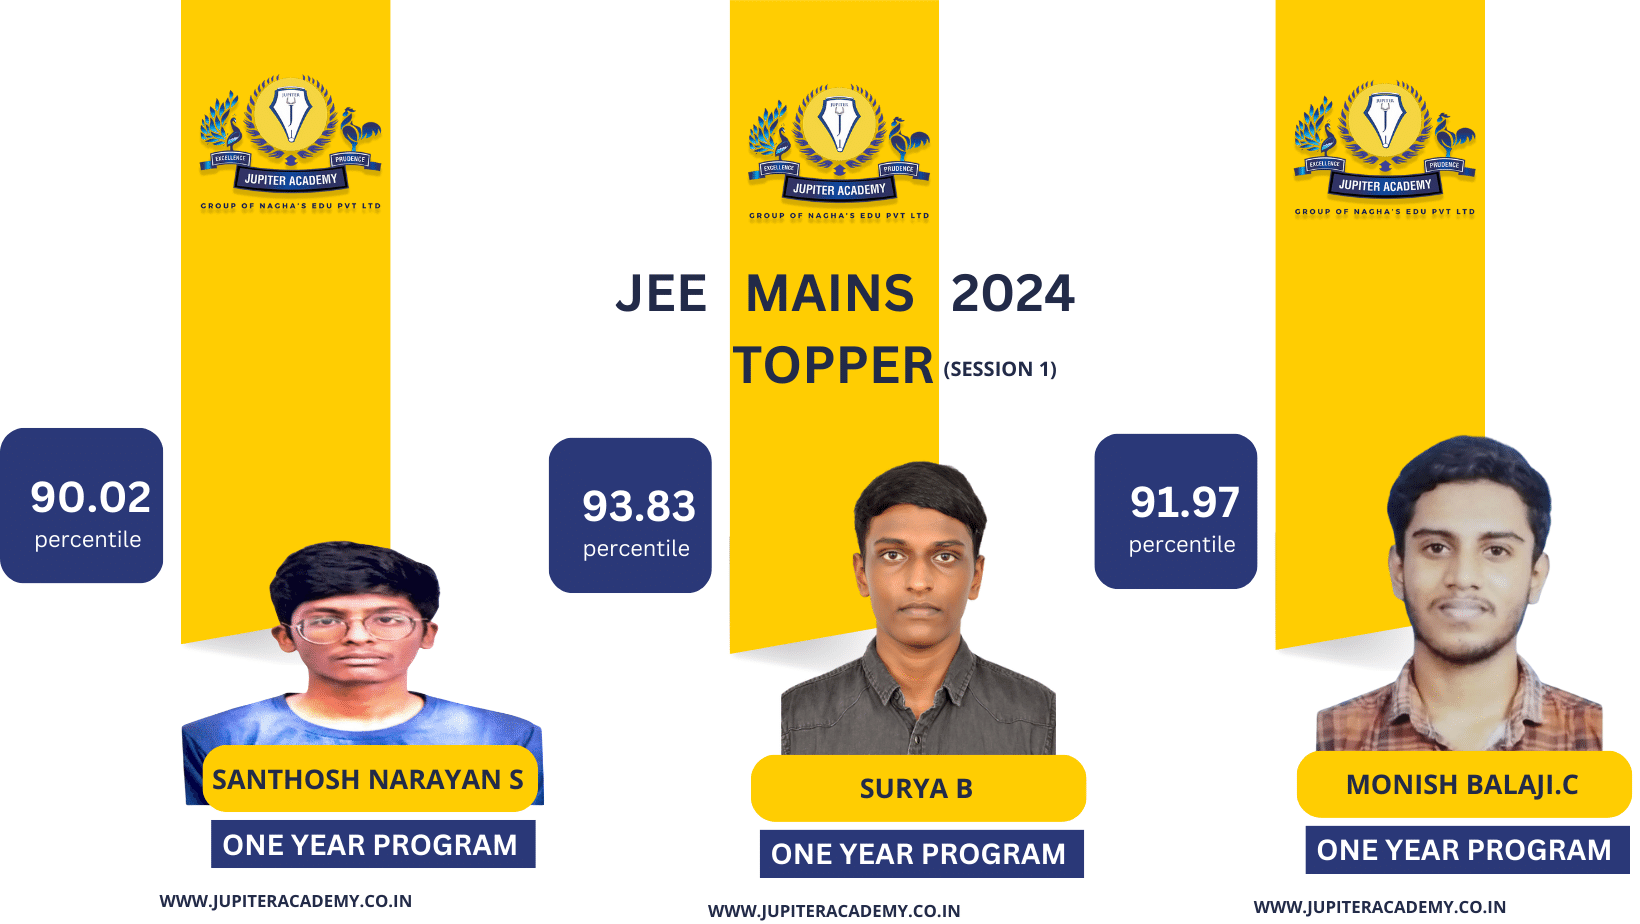 JEE MAINS 2023 RESULTS